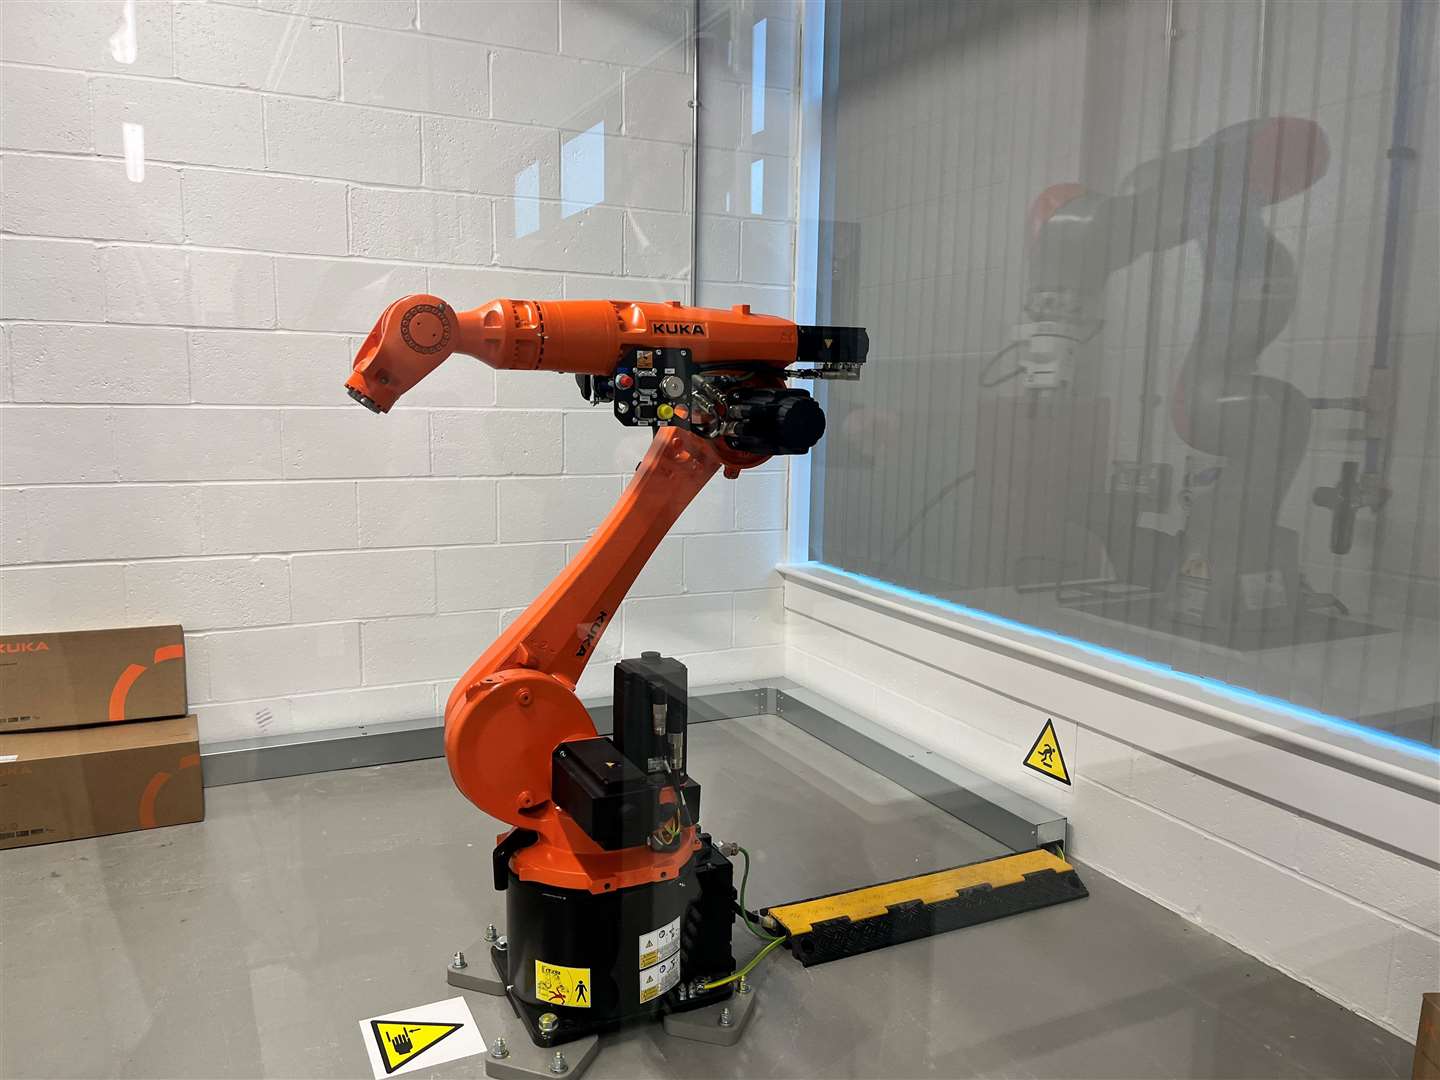 One of the robots which students can learn to programme